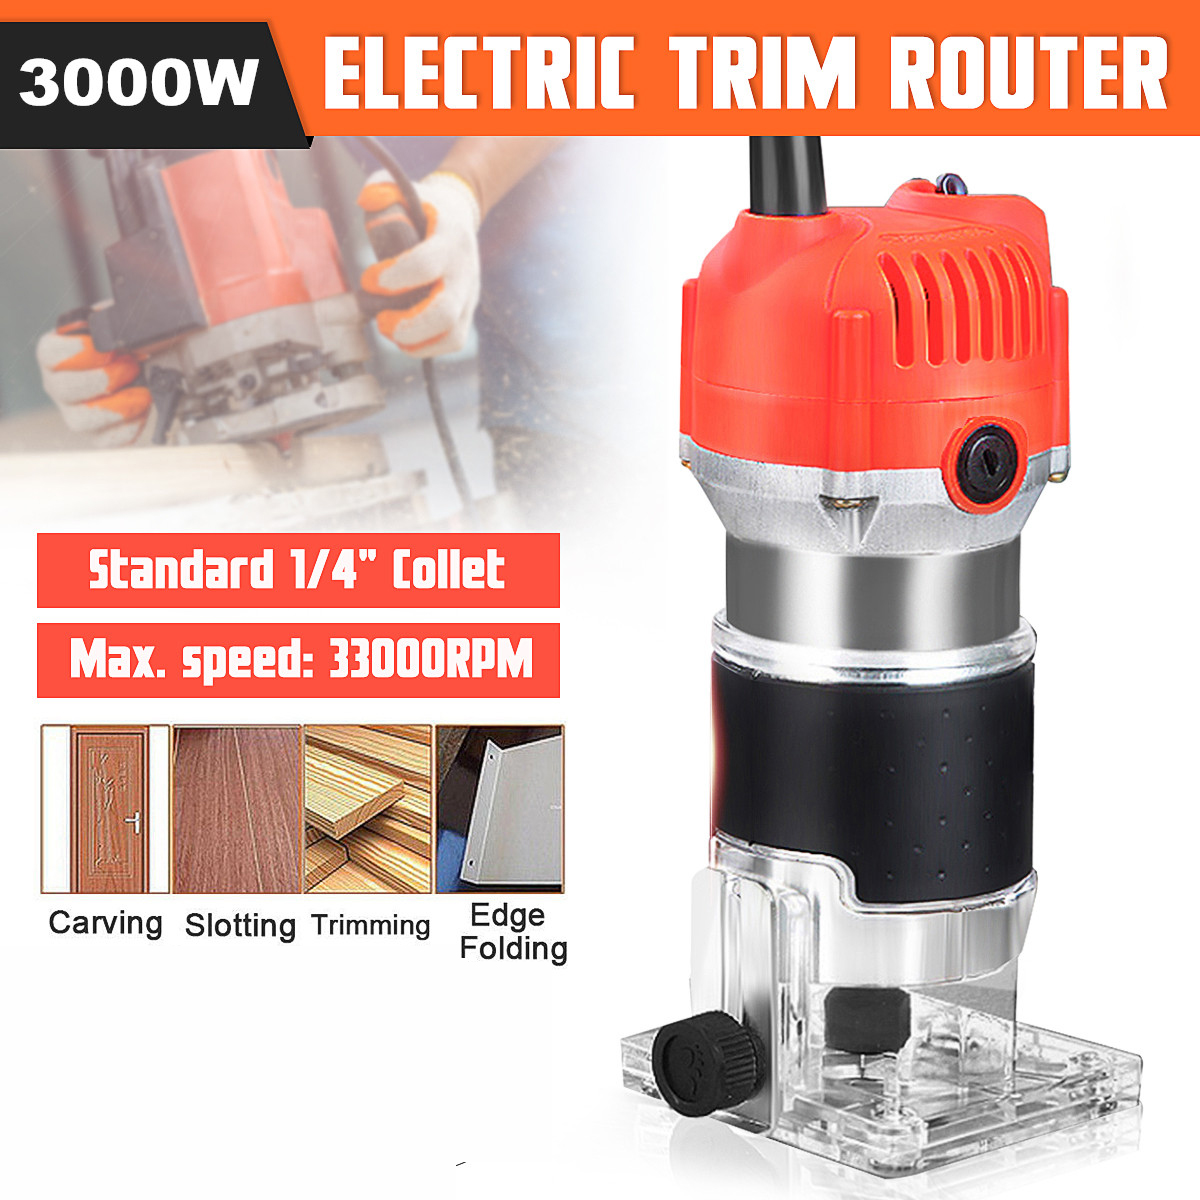 110V220V-680W-Trim-Router-Edge-Woodworking-Wood-Clean-Cuts-Power-Tool-Set-33000RPM-with-Box-1245528-1